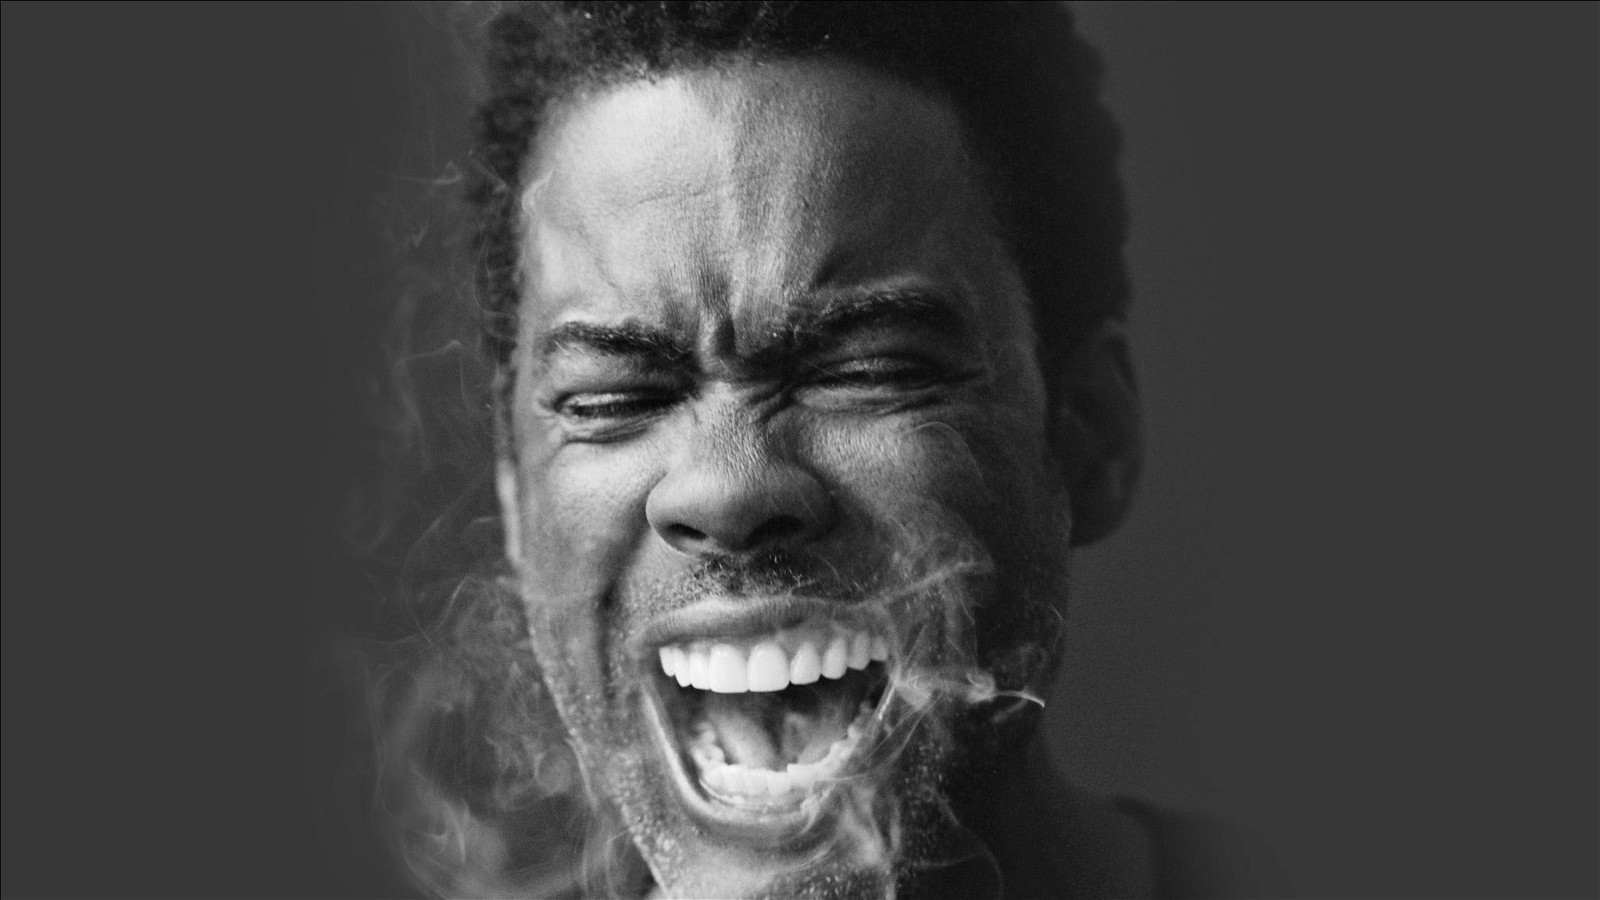 Chris Rock's Ego Death World Tour '22 sells out after the slapgate incident